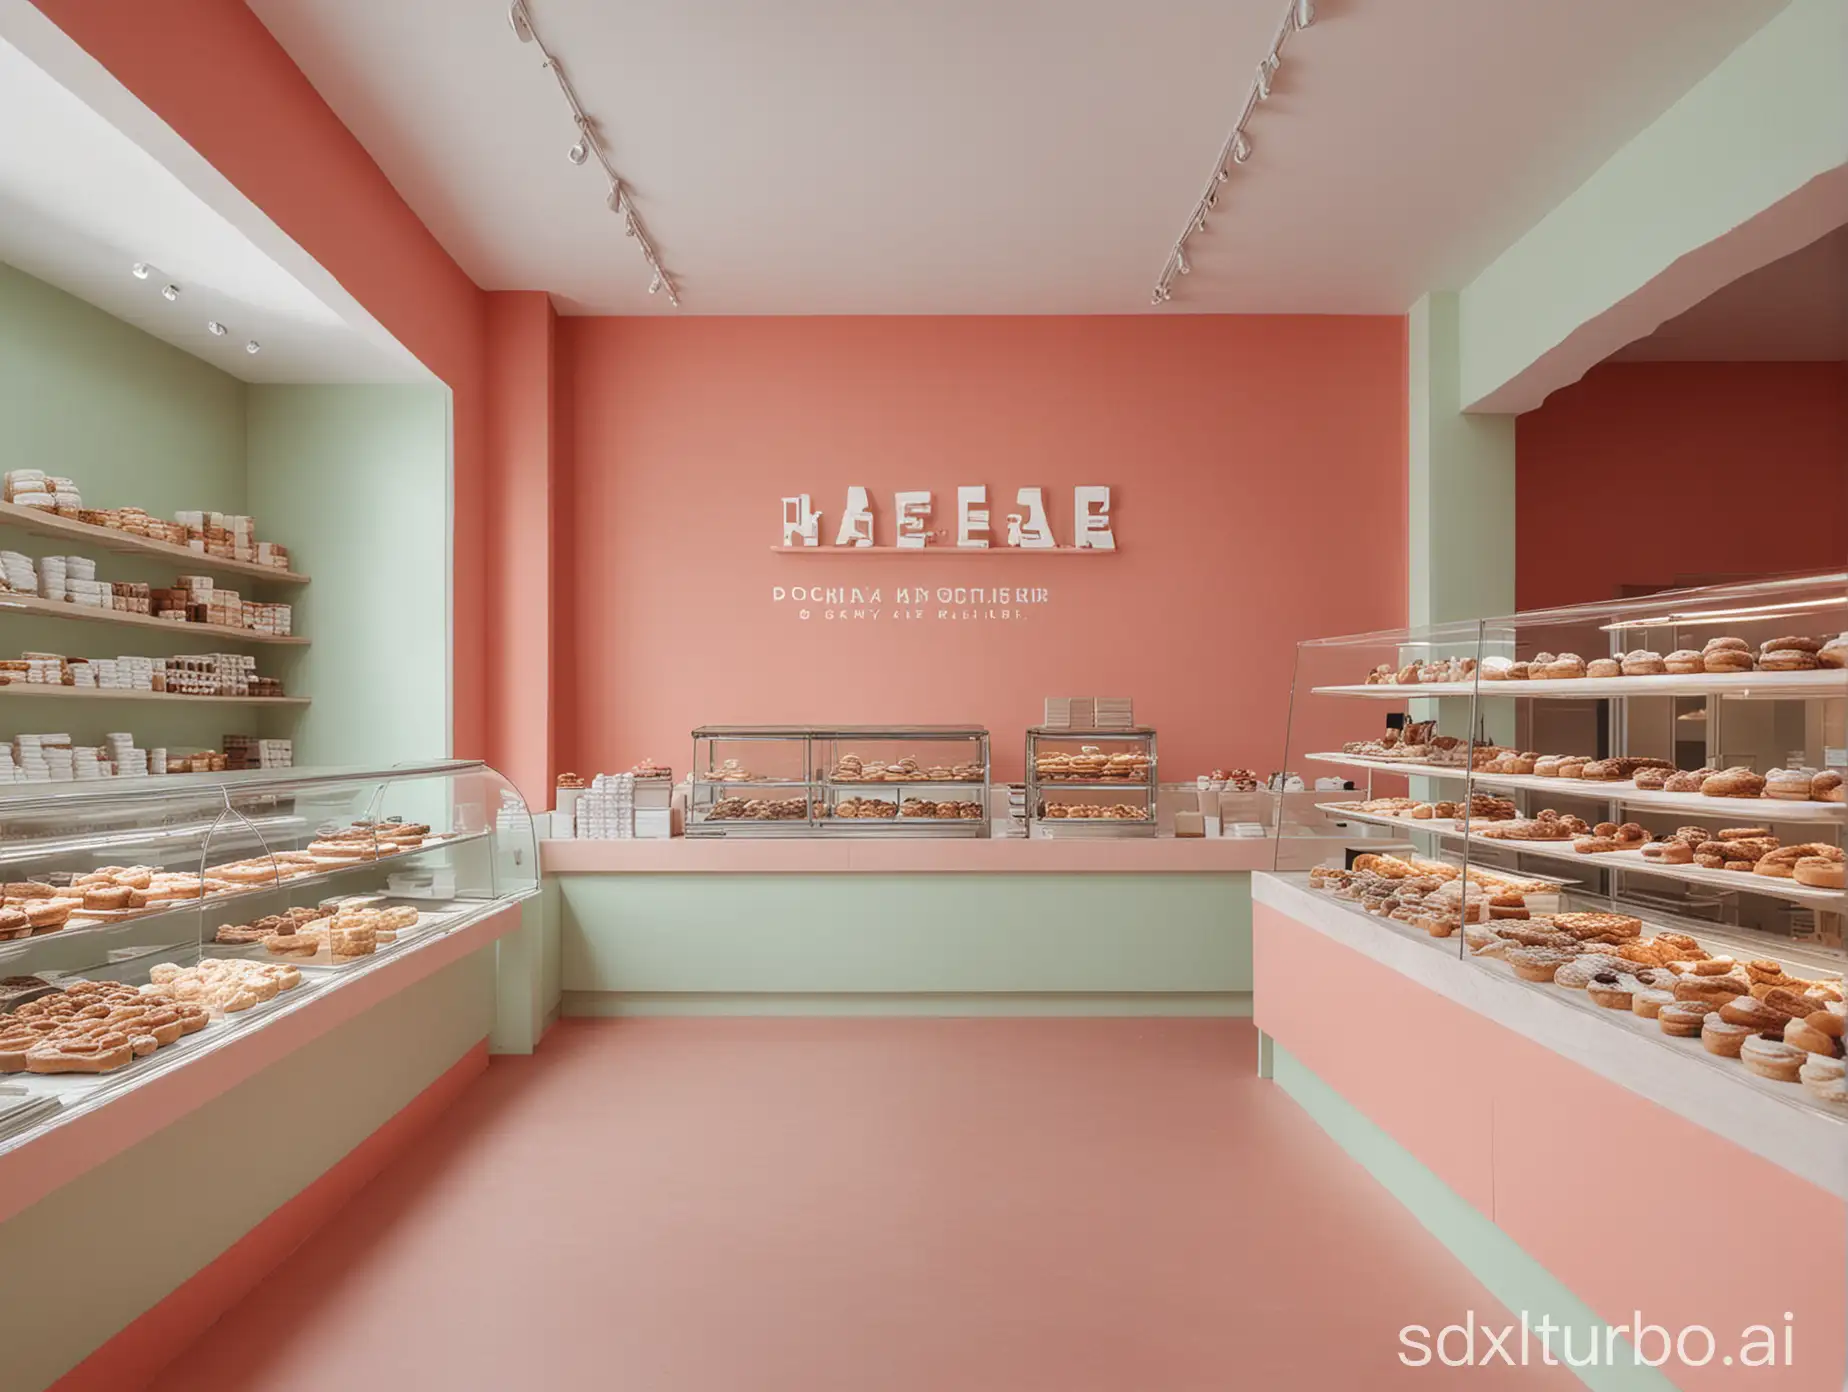 Minimalist-Bakery-and-Pastry-Shop-Spacious-Interior-in-Pale-Red-Pale-Green-and-White